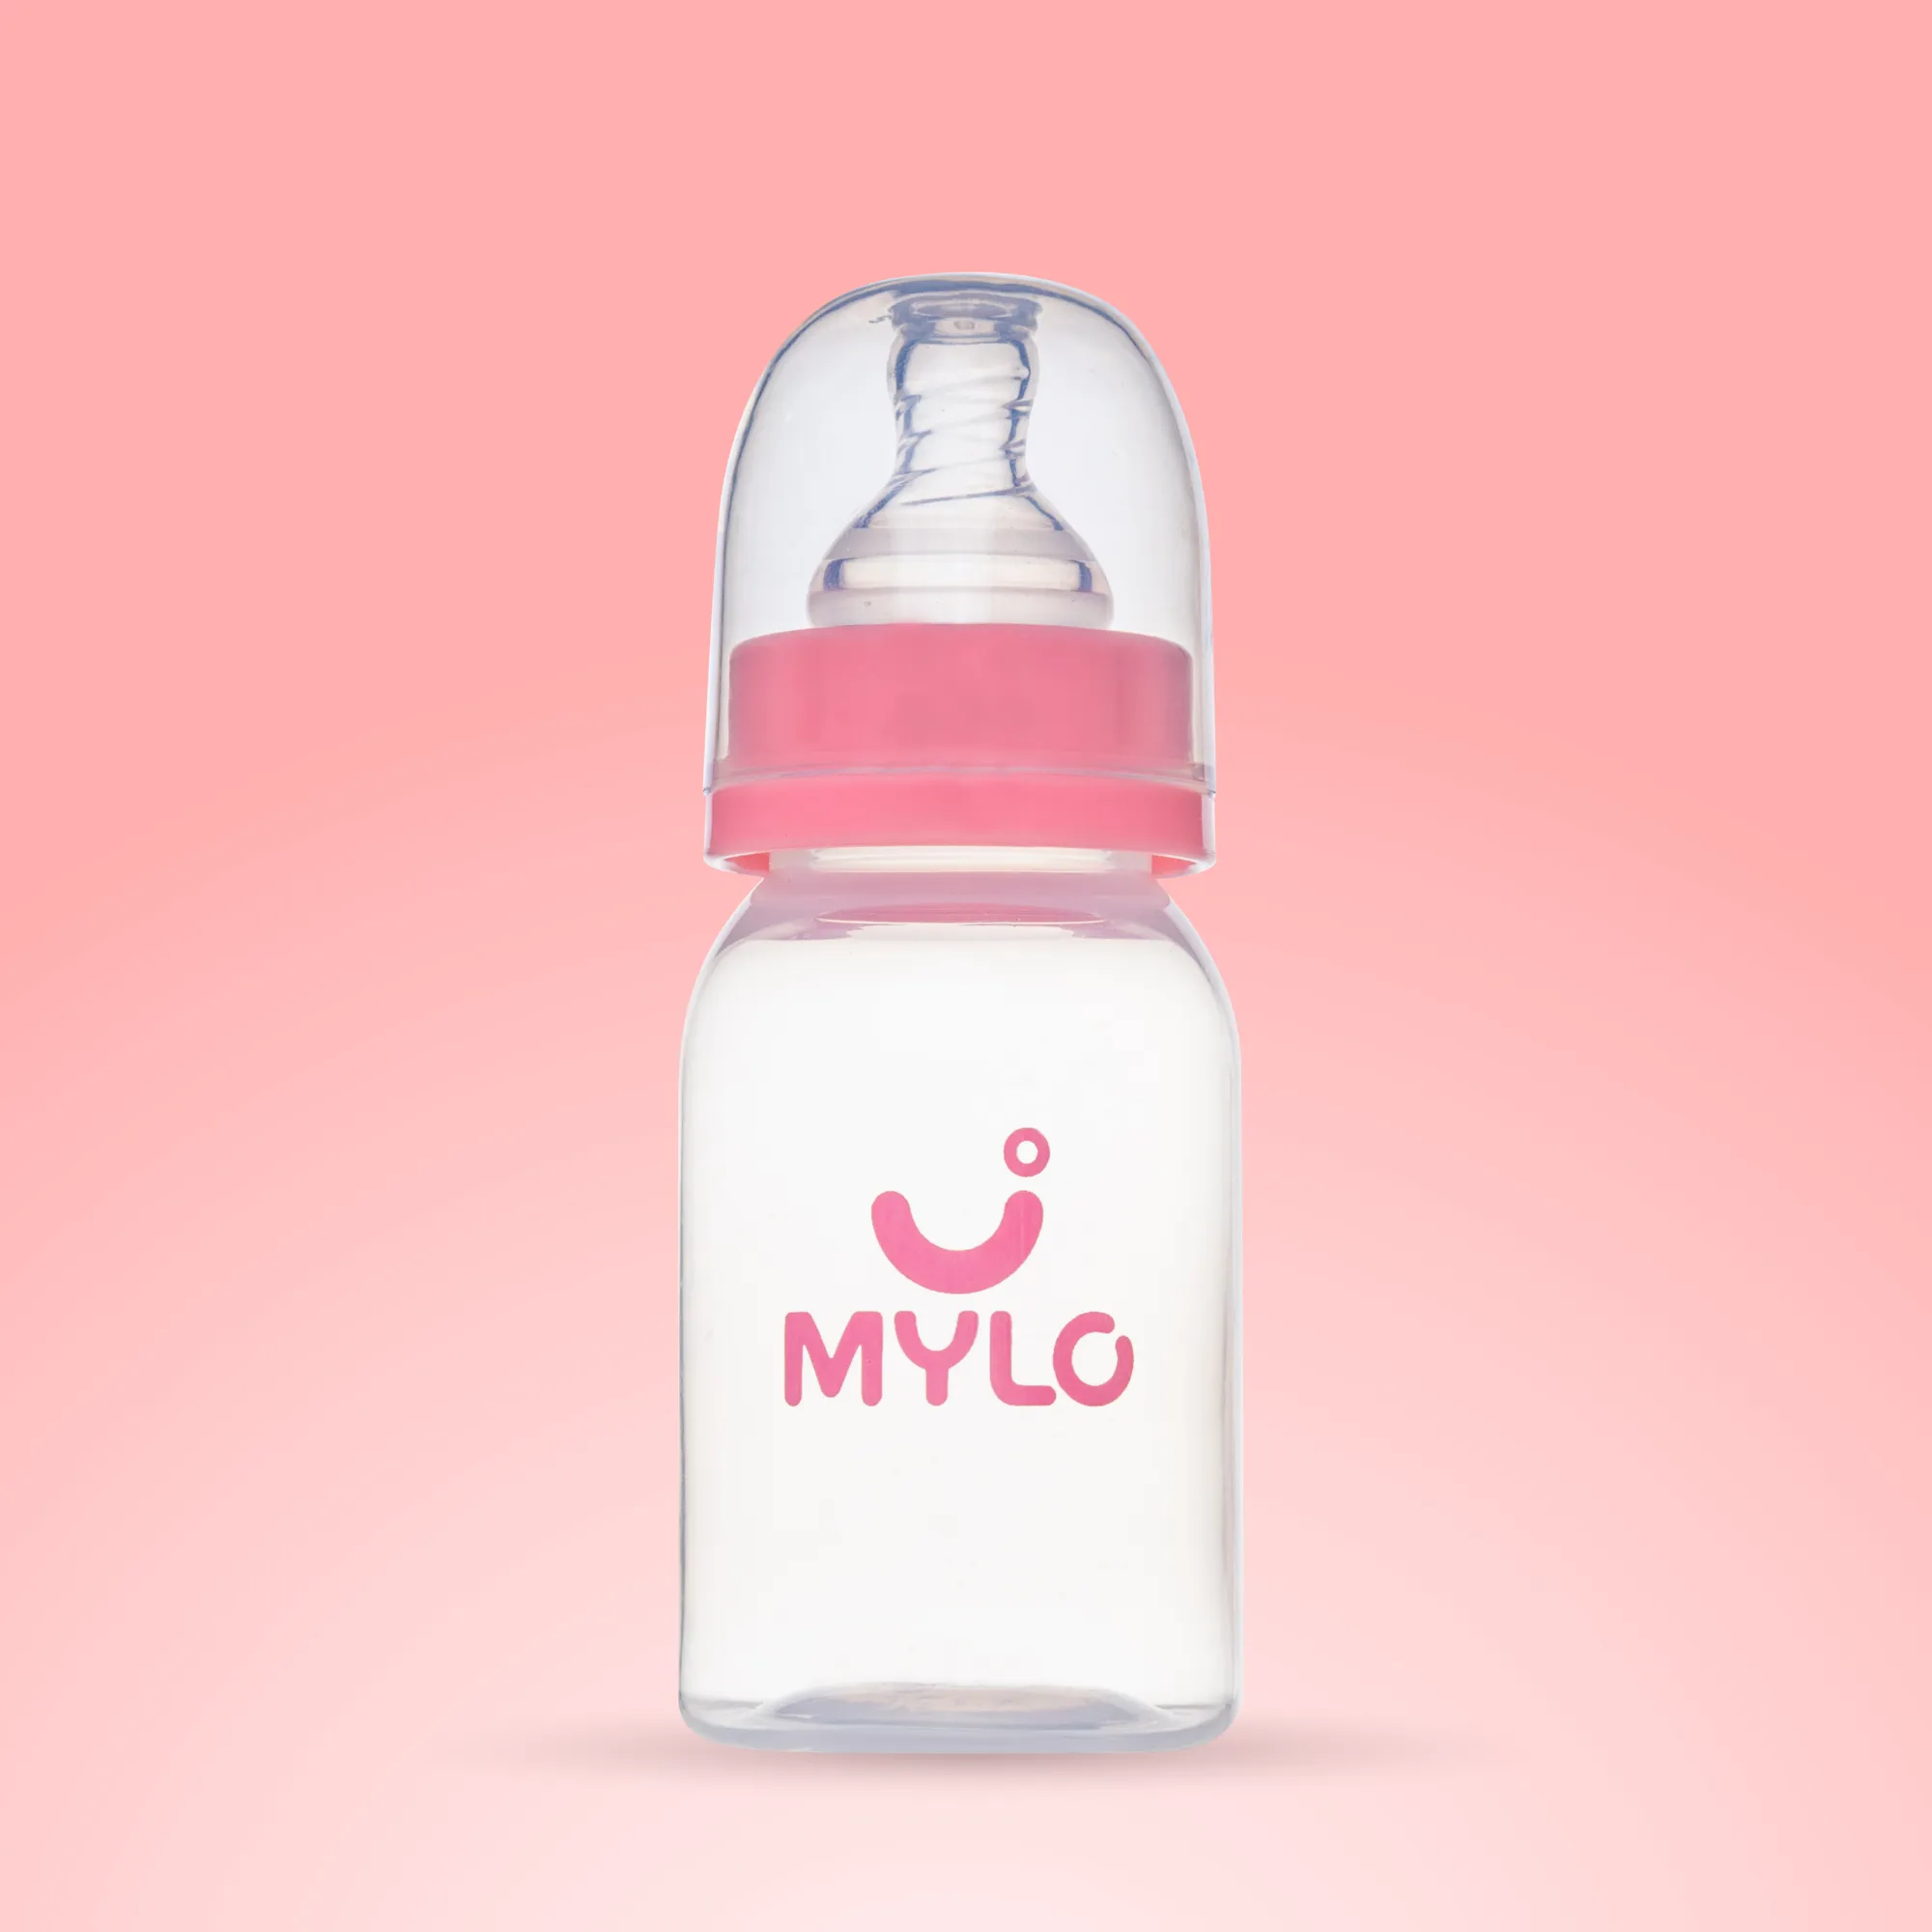 2-in-1 Baby Feeding Bottle | BPA Free with Anti-Colic Nipple & Spoon | Feels Natural Baby Bottle | Easy Flow Neck Design - Pink 125ml